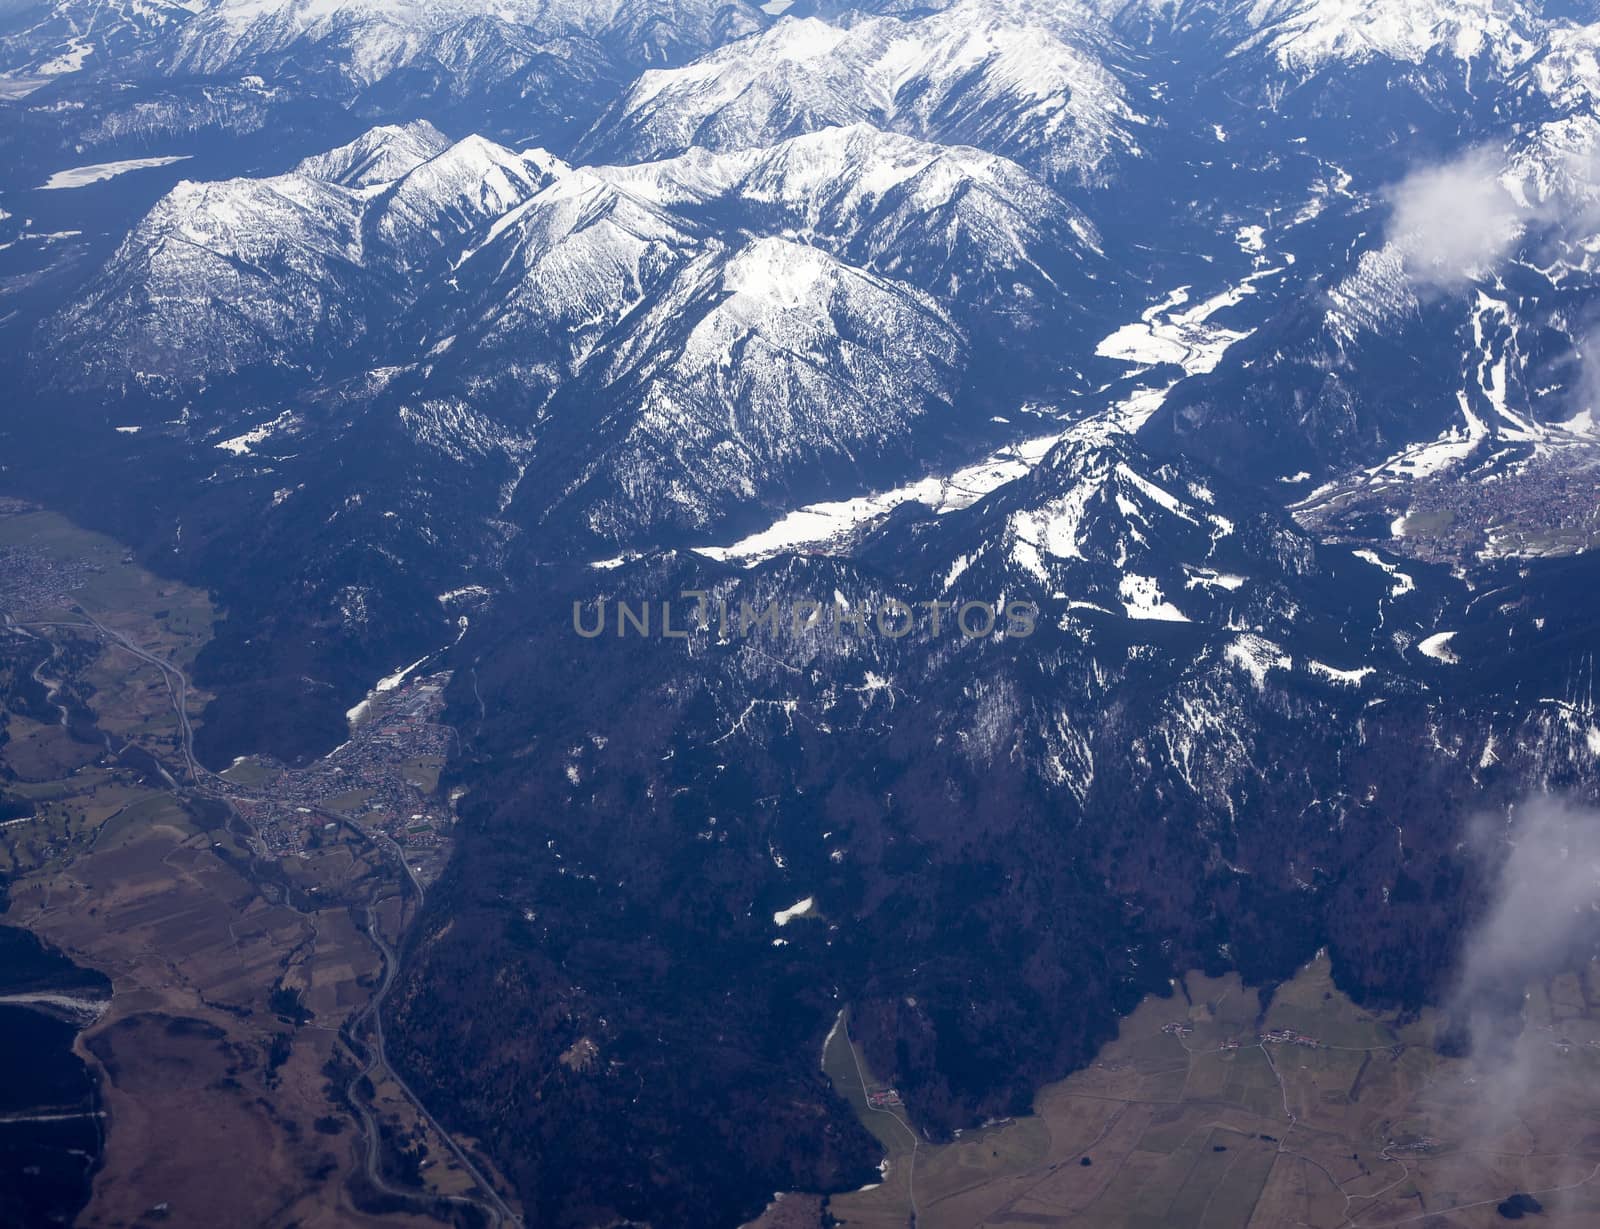 Aerial shot of the Alps taken from an altitude of 39,000ft.